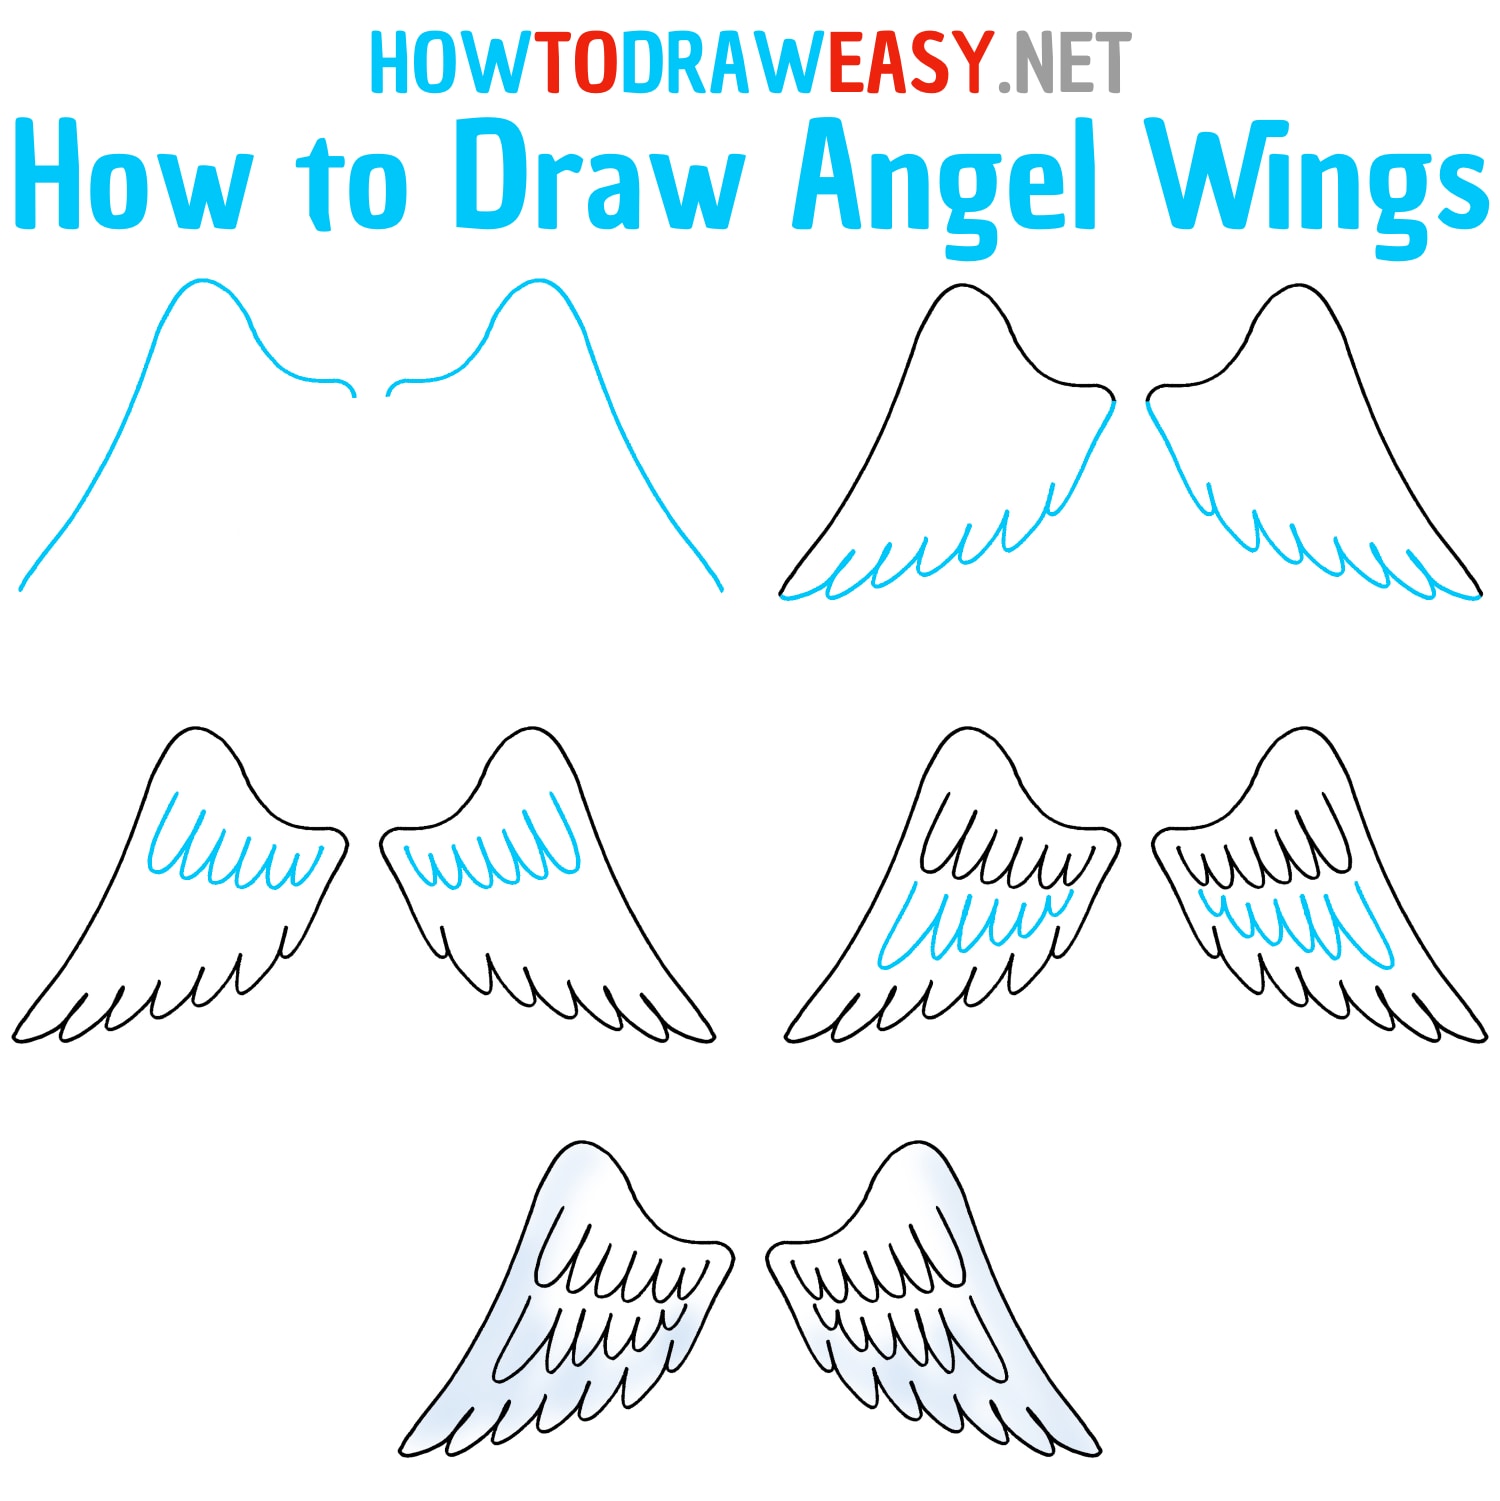 How to Draw Angel Wings Step by Step